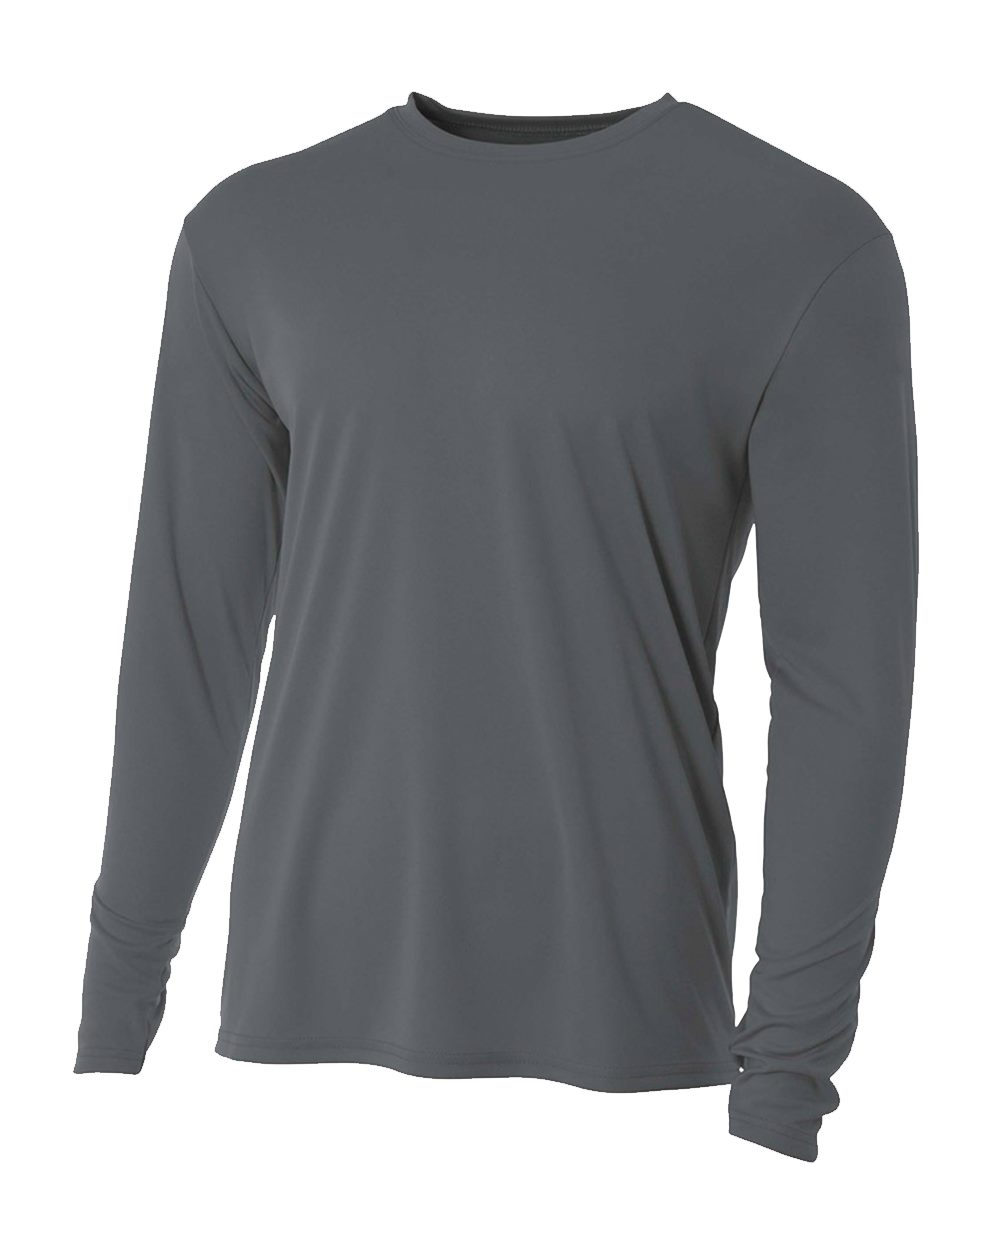 Men's Dry-Fit Moisture Wicking Performance Long Sleeve T-Shirt, UV Sun  Protection Outdoor Active Athletic Crew Top S-2XL 